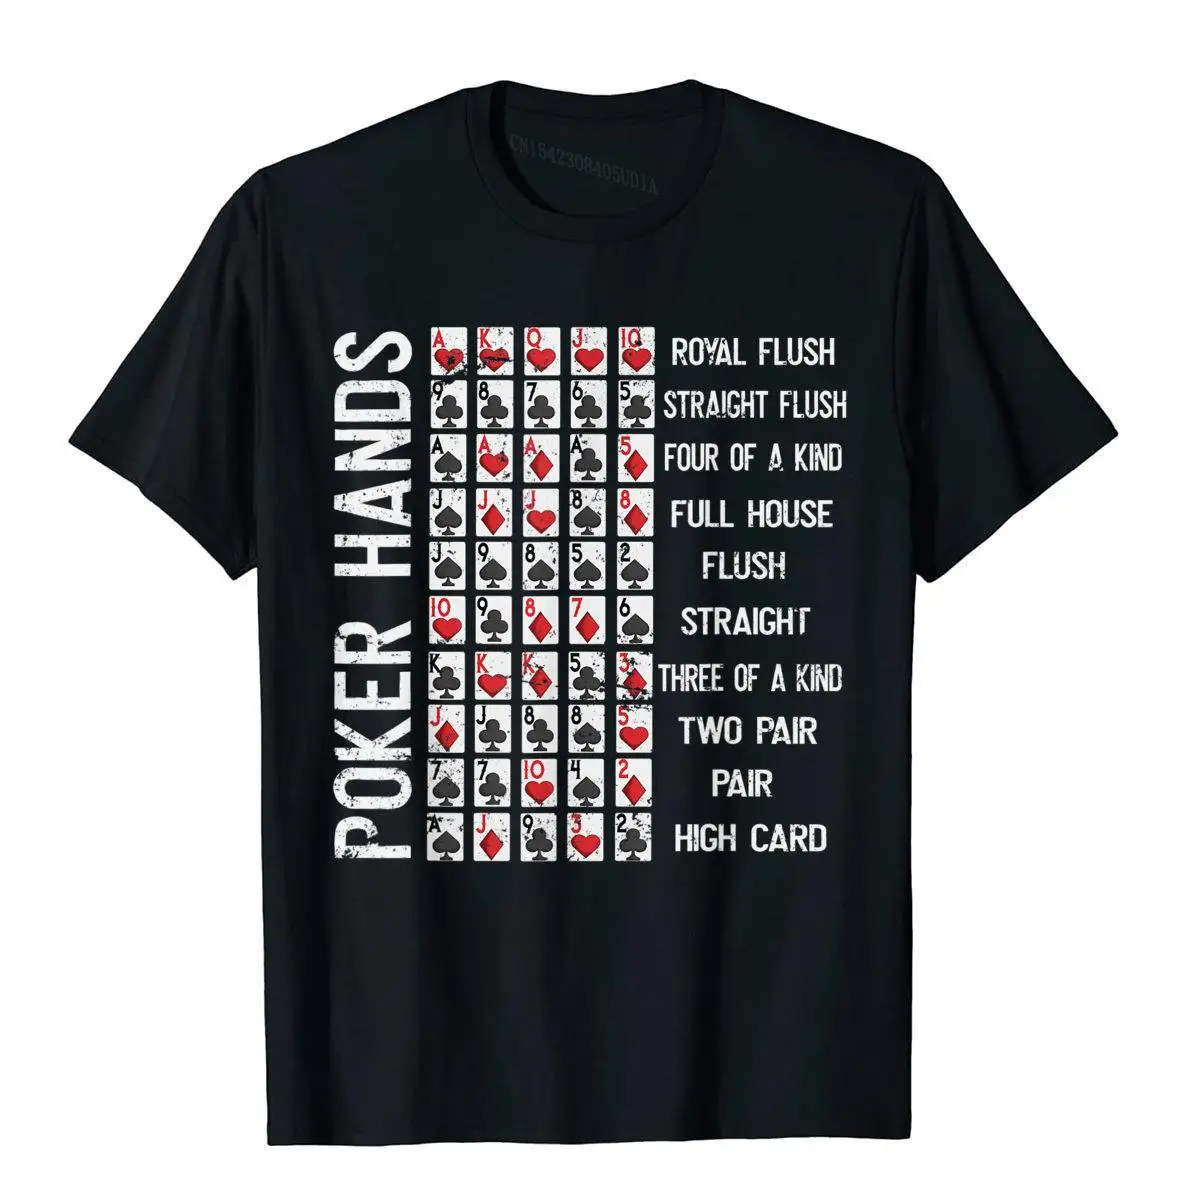 Poker Hands Cheat Sheet Card Casino Games Funny Player Gift T-Shirt T Shirt Tees Funny Cotton Crazy 3D Style Mens